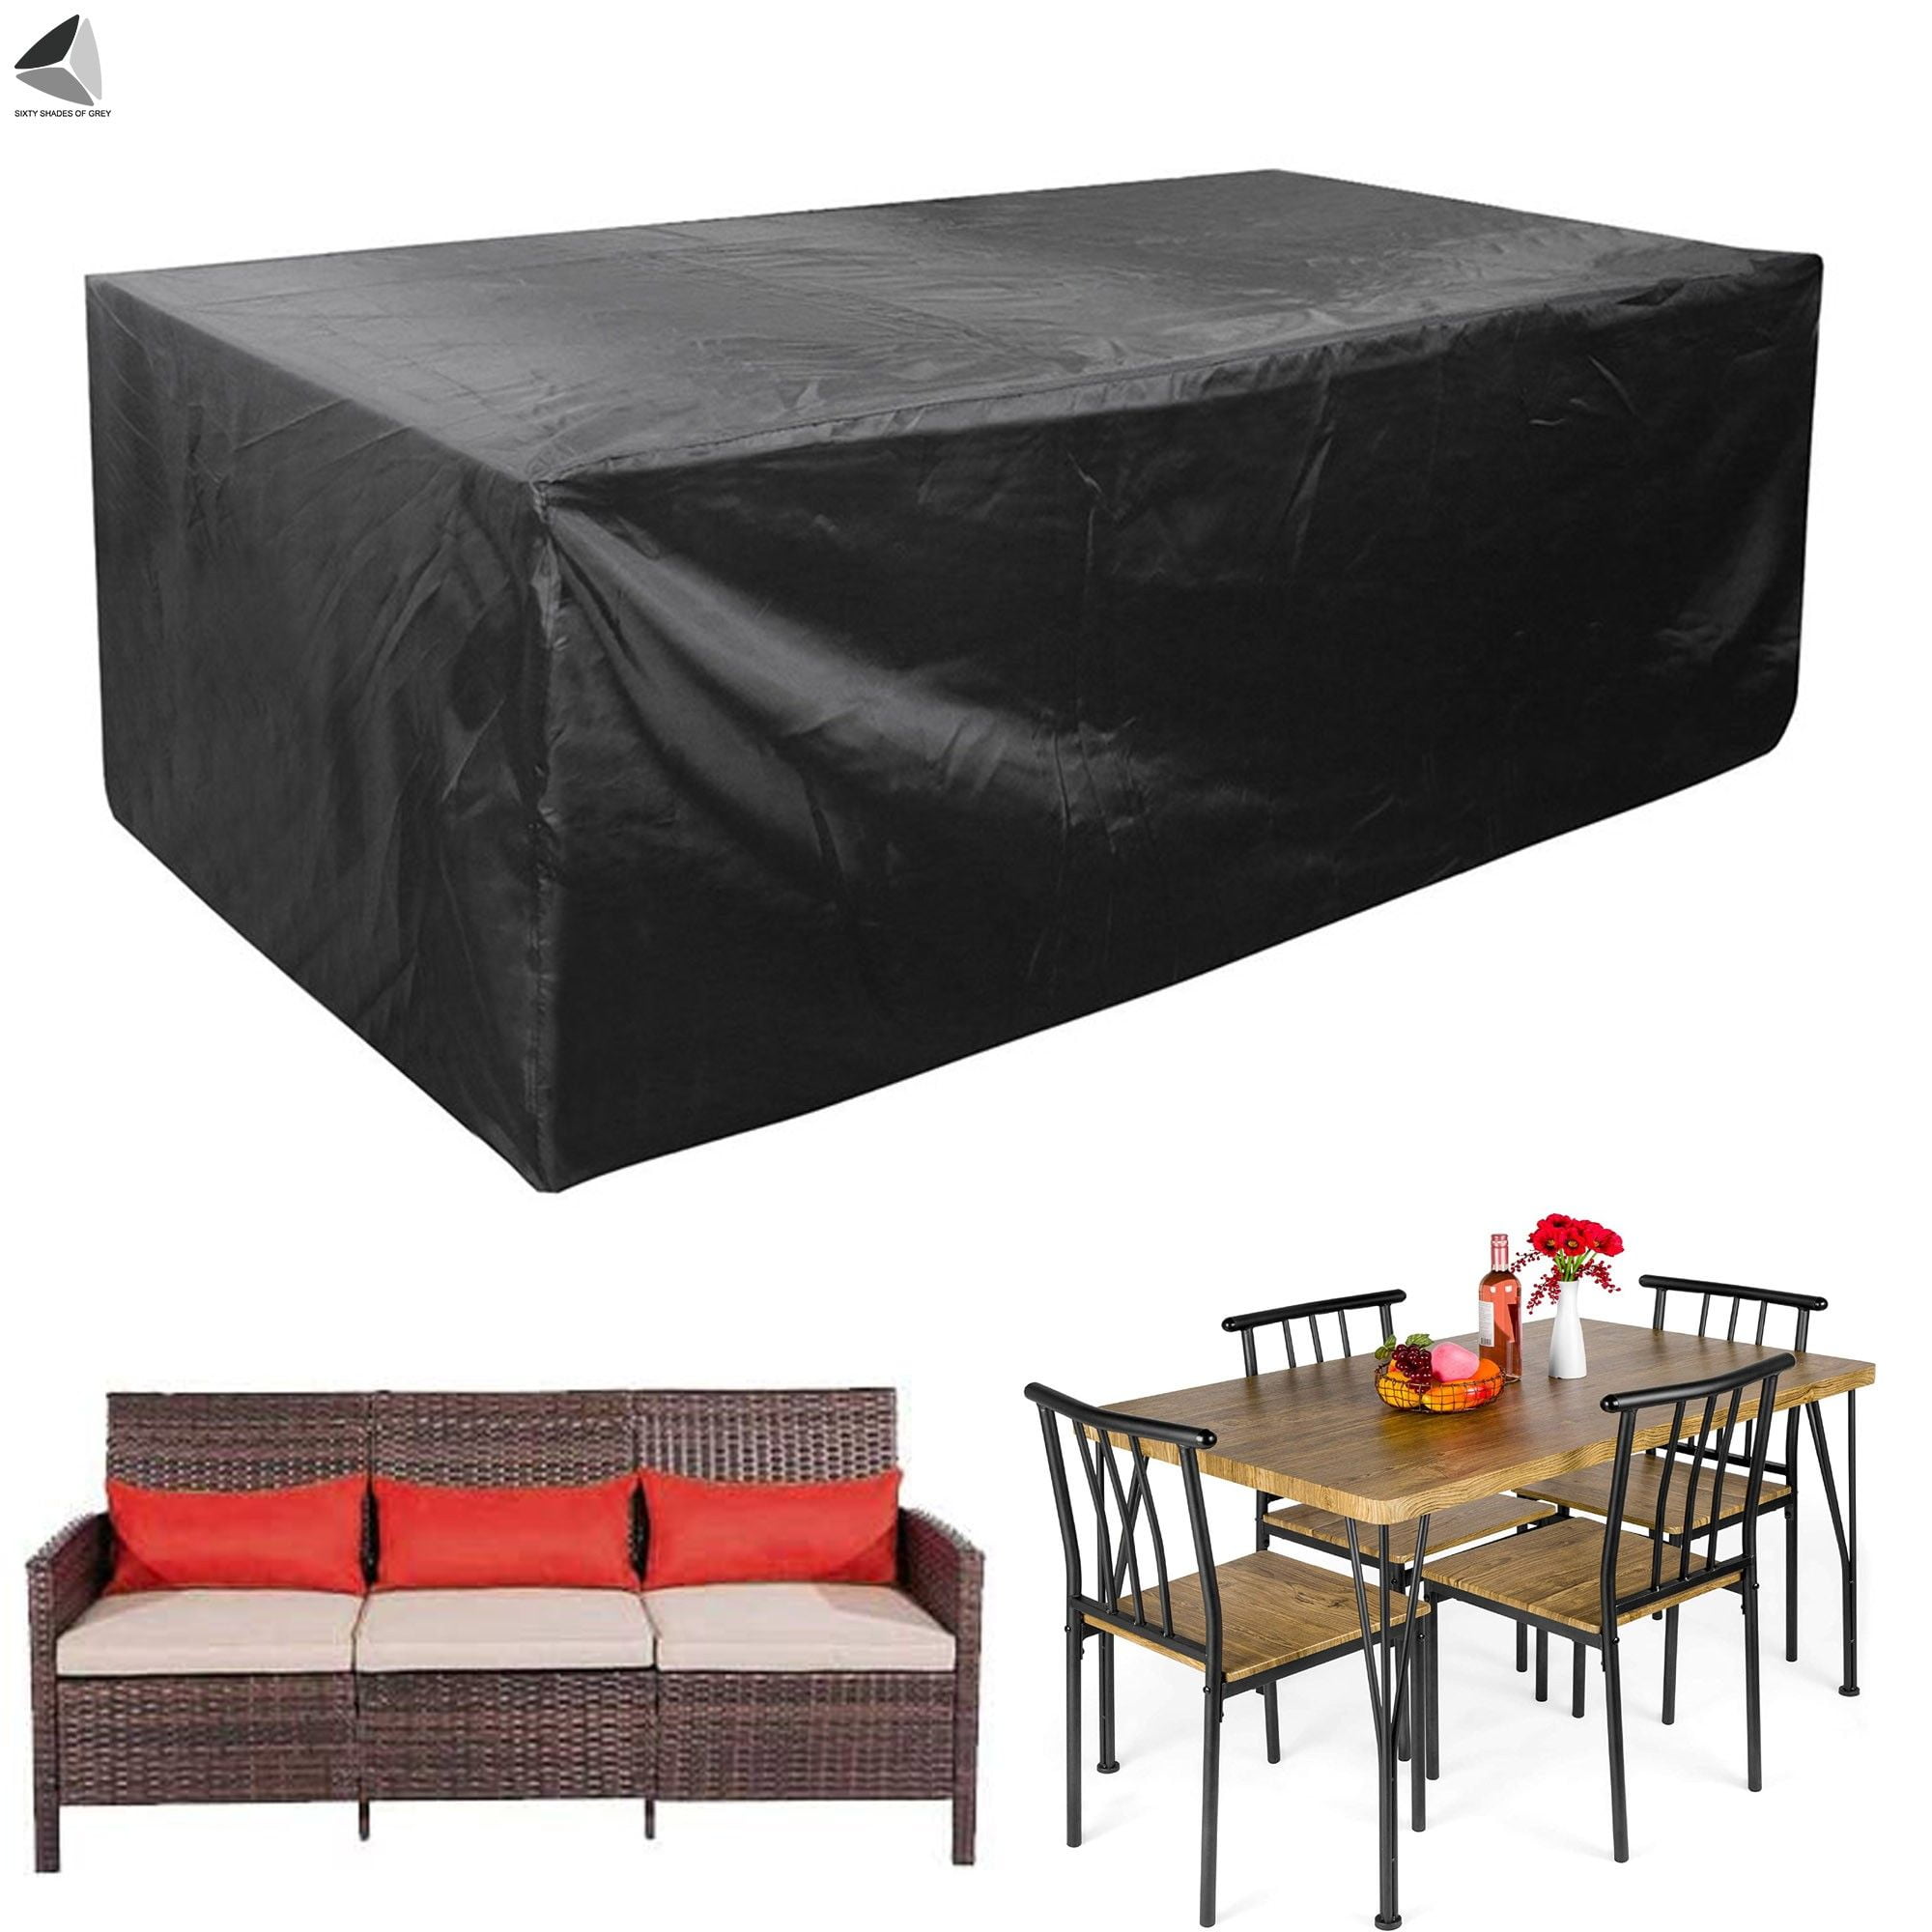 Waterproof Garden Patio Furniture Set Cover Covers For Outdoor Rattan Table Cube 